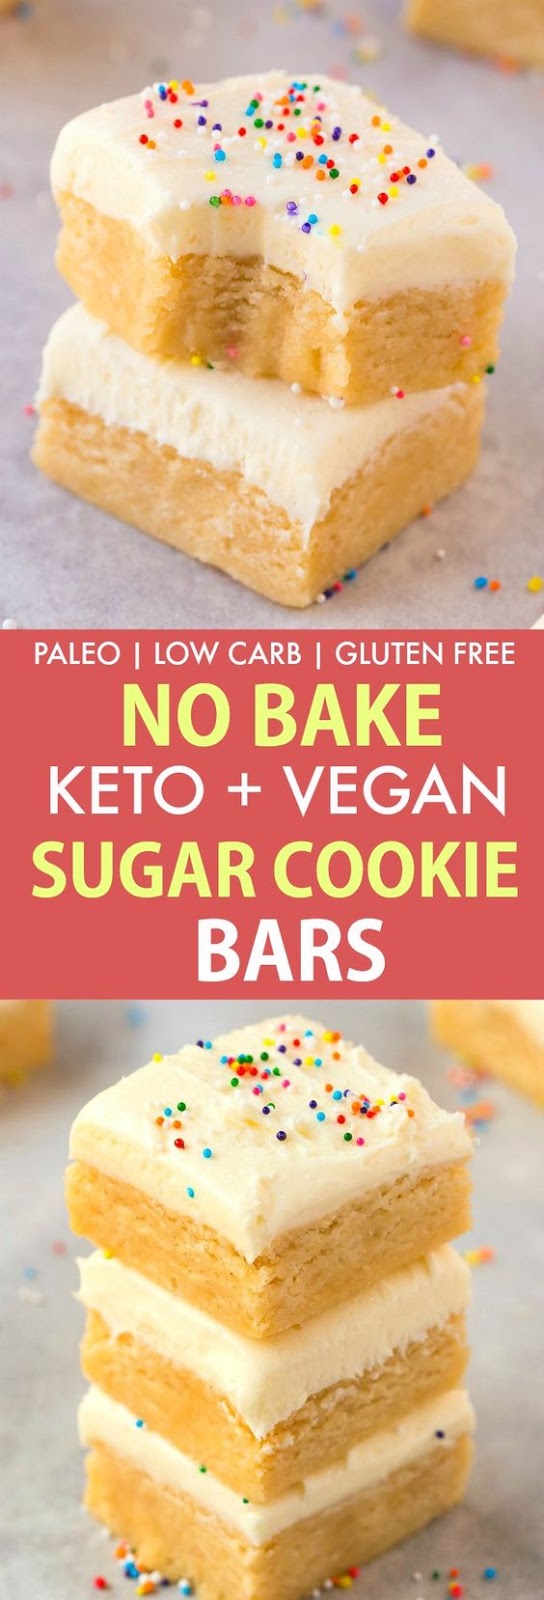 Healthy No Bake Paleo Vegan Sugar Cookie Bars- Perfect for Christmas, Thanksgiving and the holidays, this keto and low carb dessert is SO easy and takes minutes! #thanksgiving #christmasrecipe #sugarcookie #nobake #ketodessert #vegandessert #holidaybaking